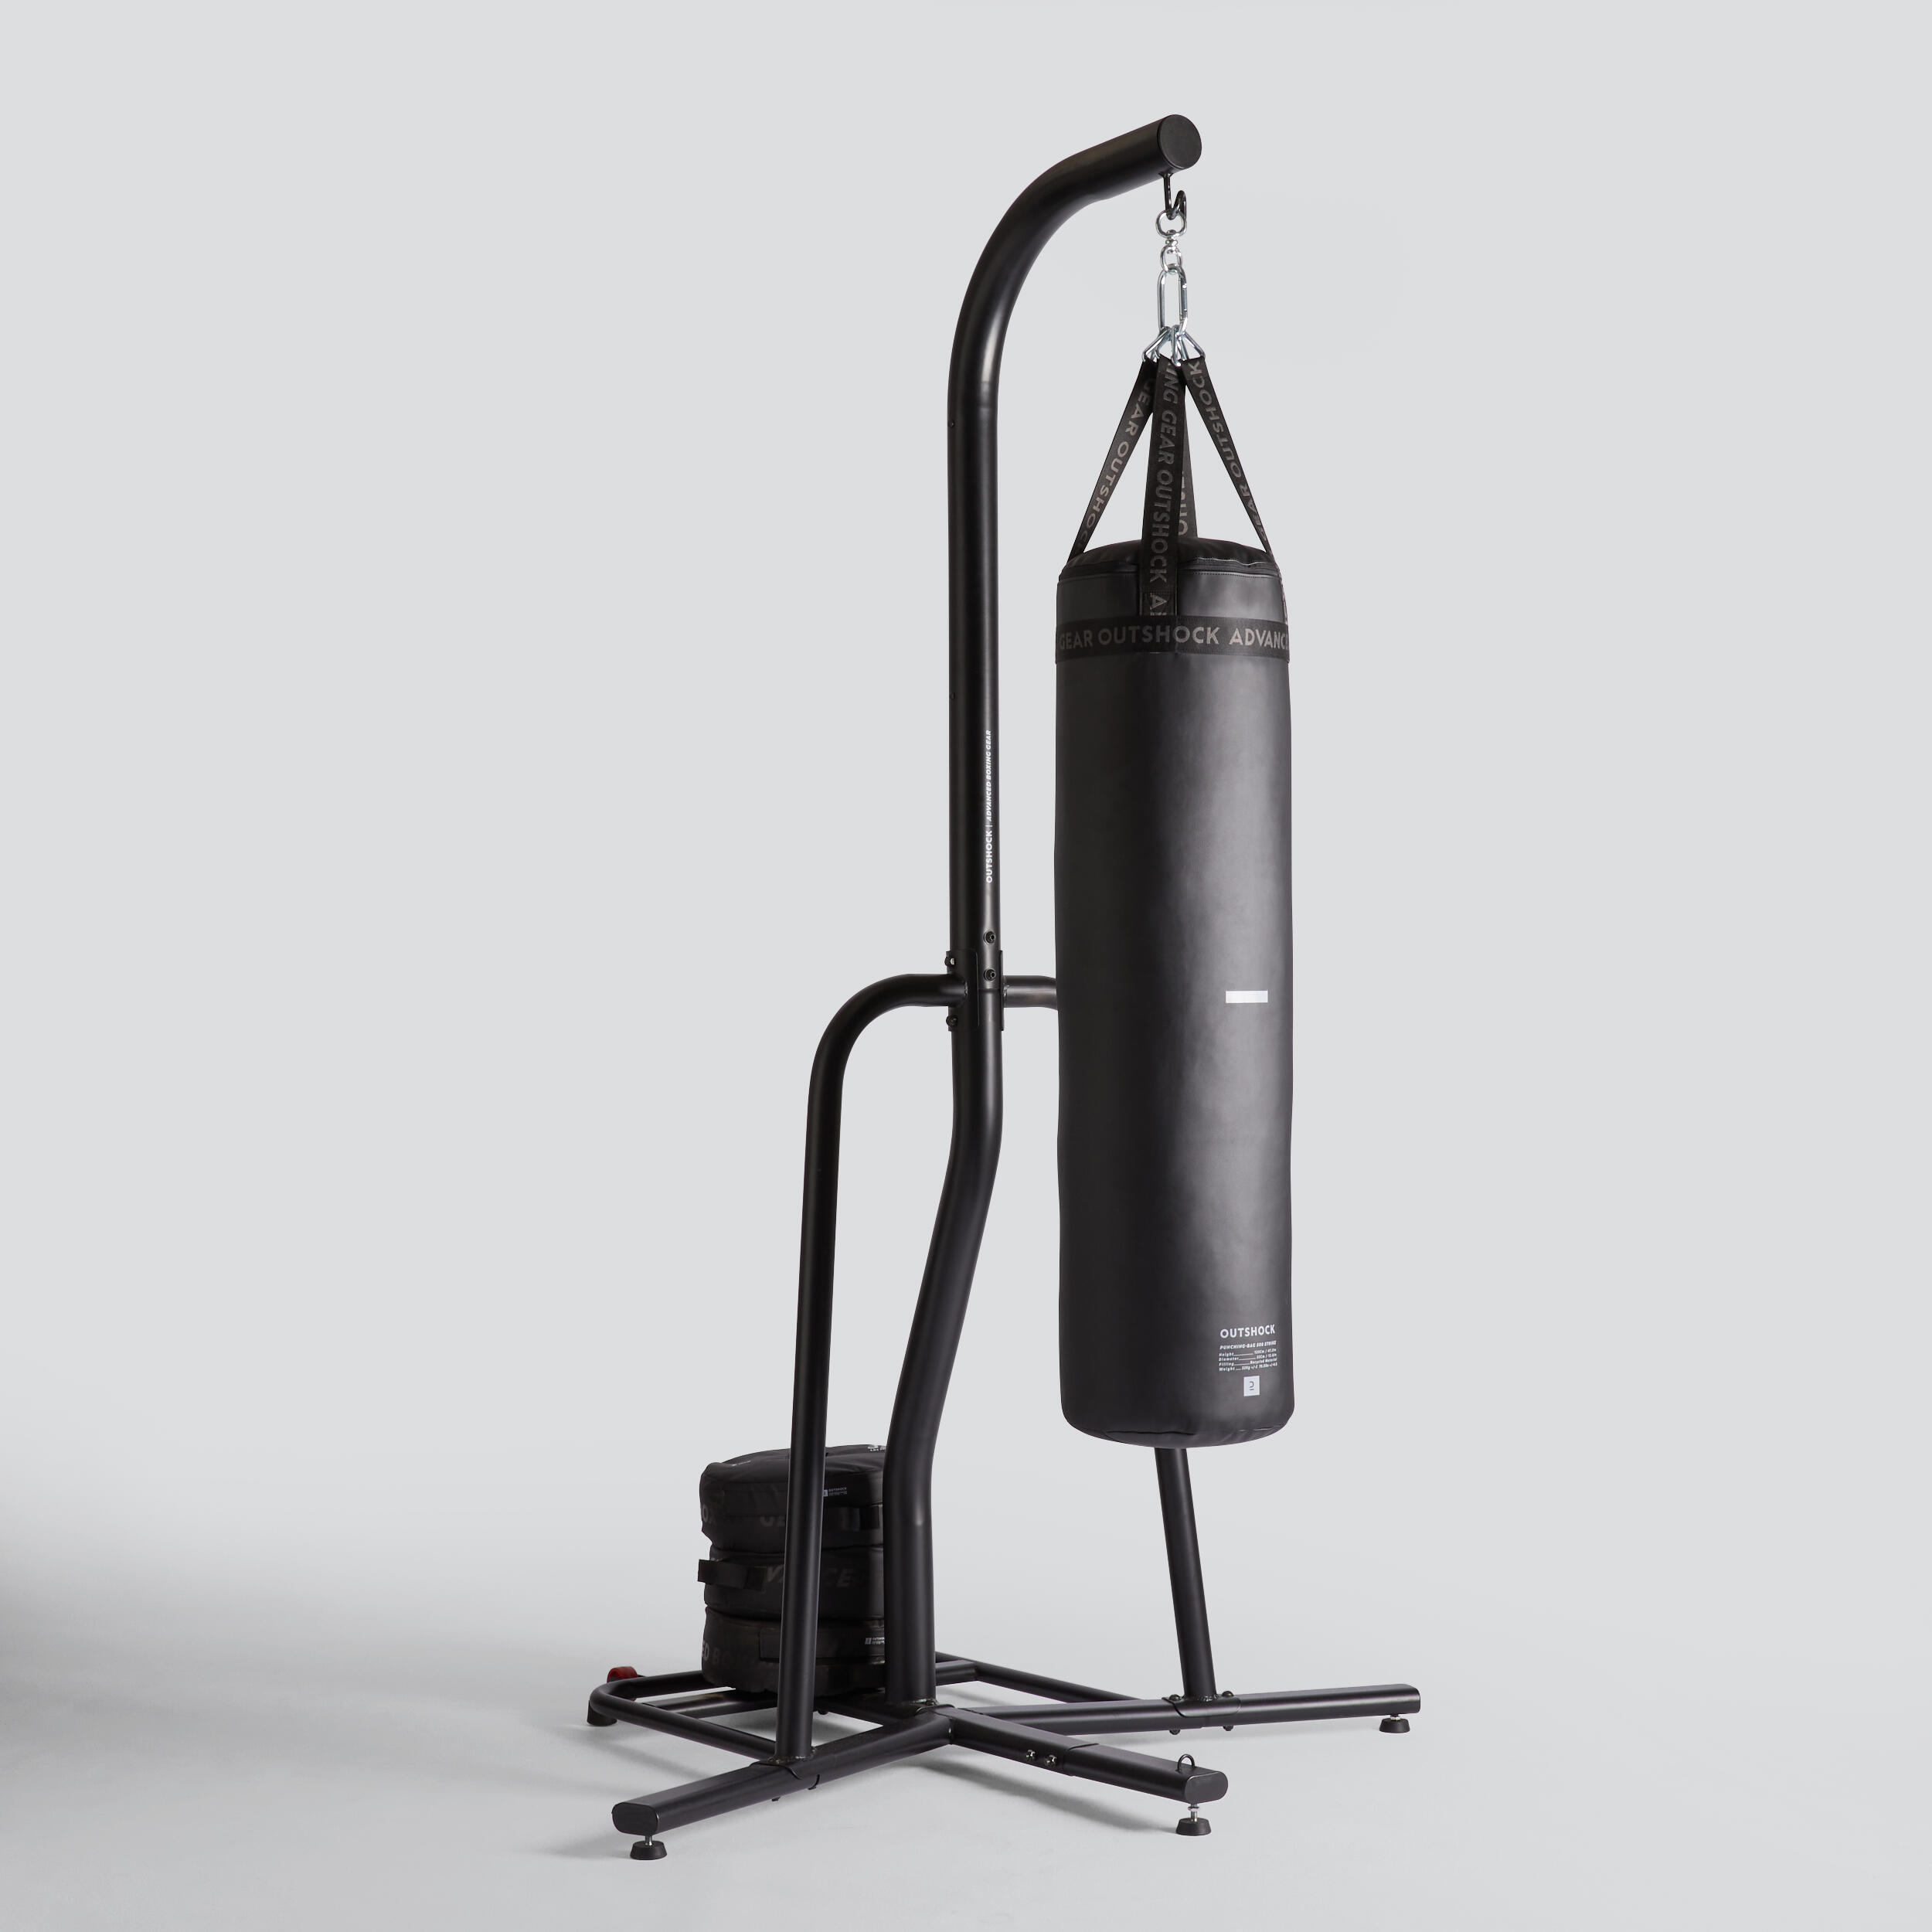 900 Punching Bag Stand - OUTSHOCK